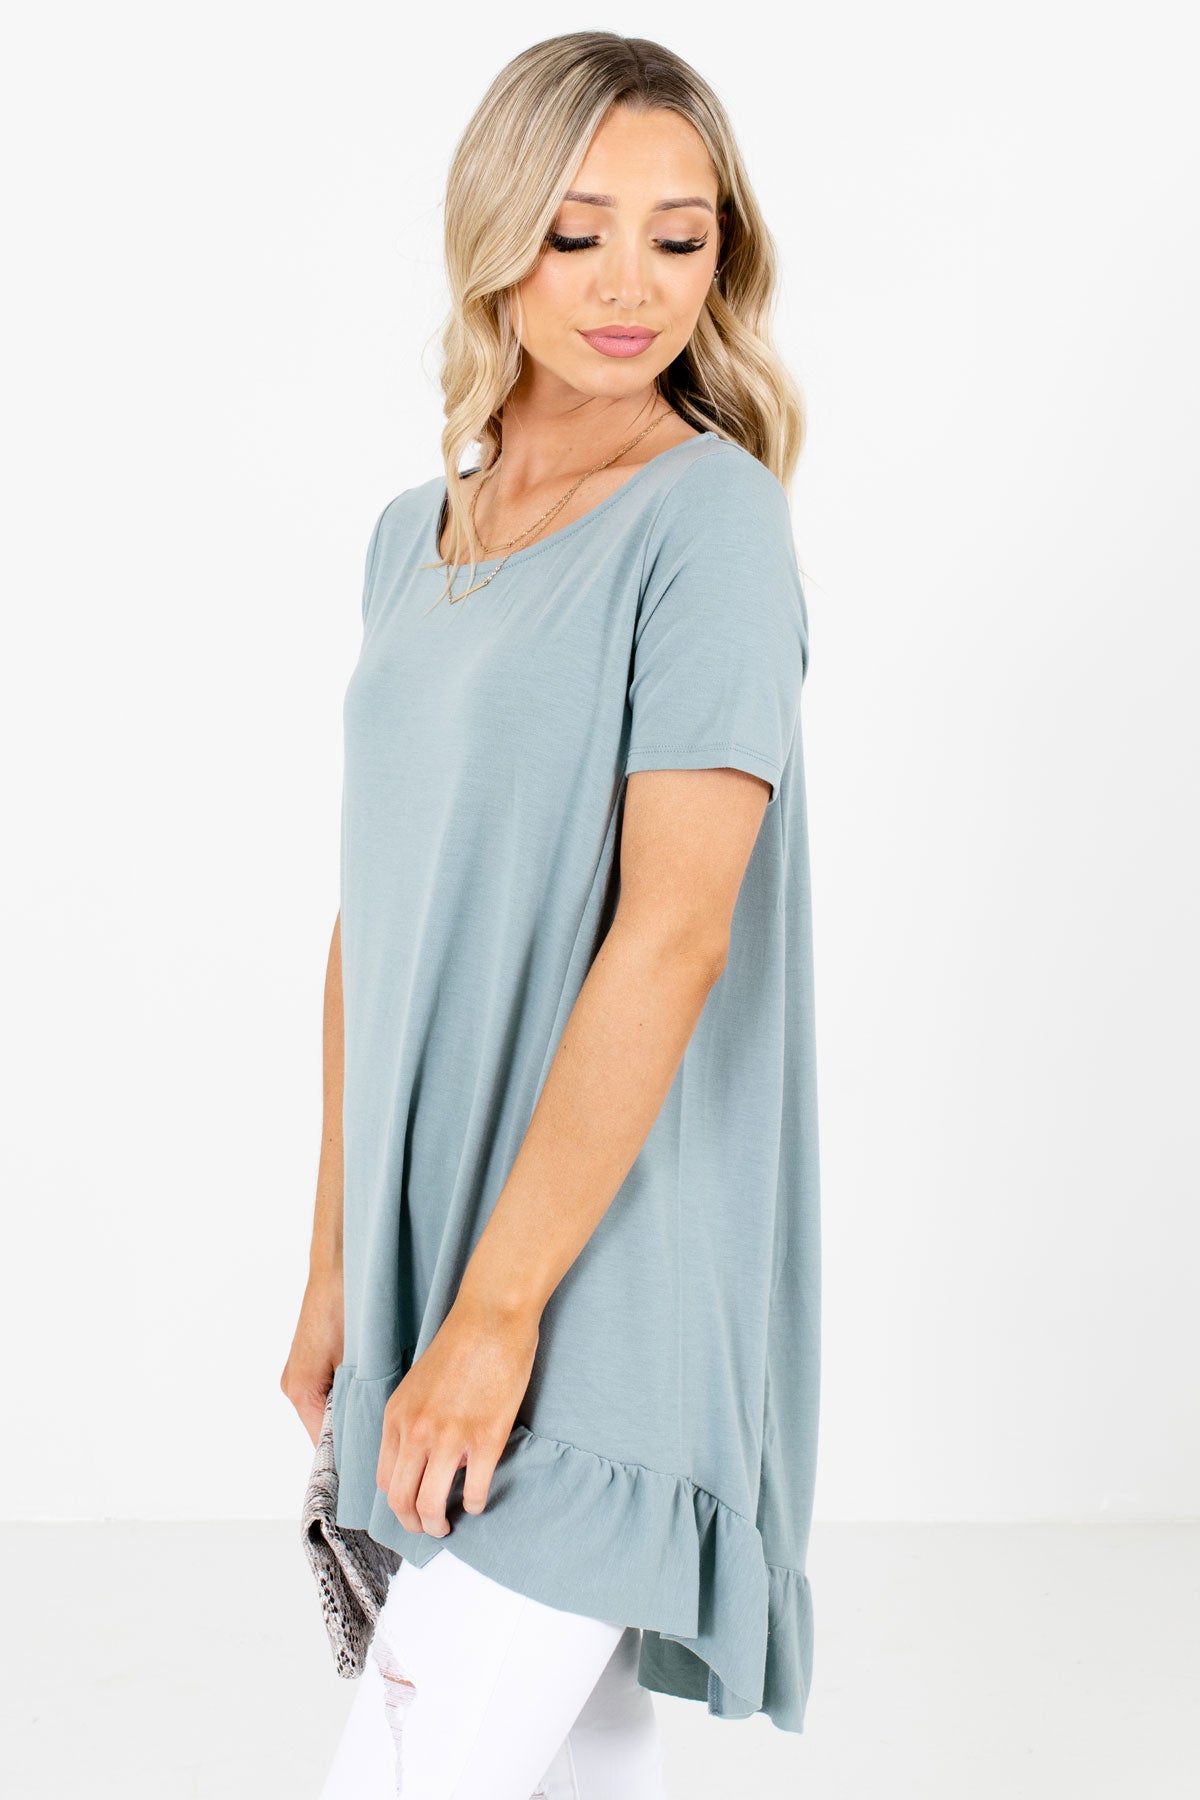 Casual Obsession Peplum Top